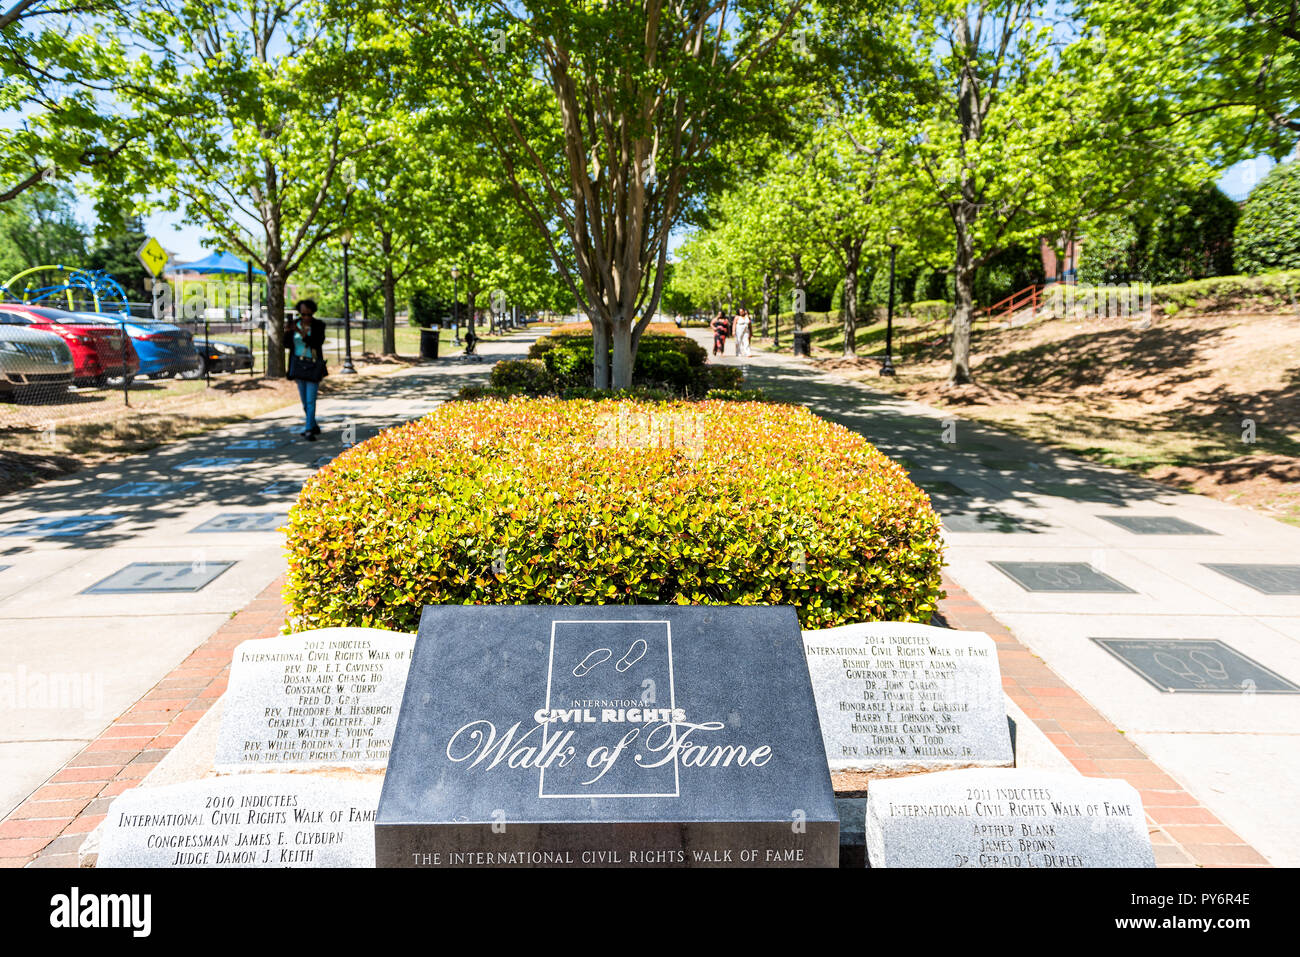 Atlanta, USA - April 20, 2018: Historic MLK Martin Luther King Jr National Park sign of walk of fame in Georgia downtown, green trees in urban city Stock Photo